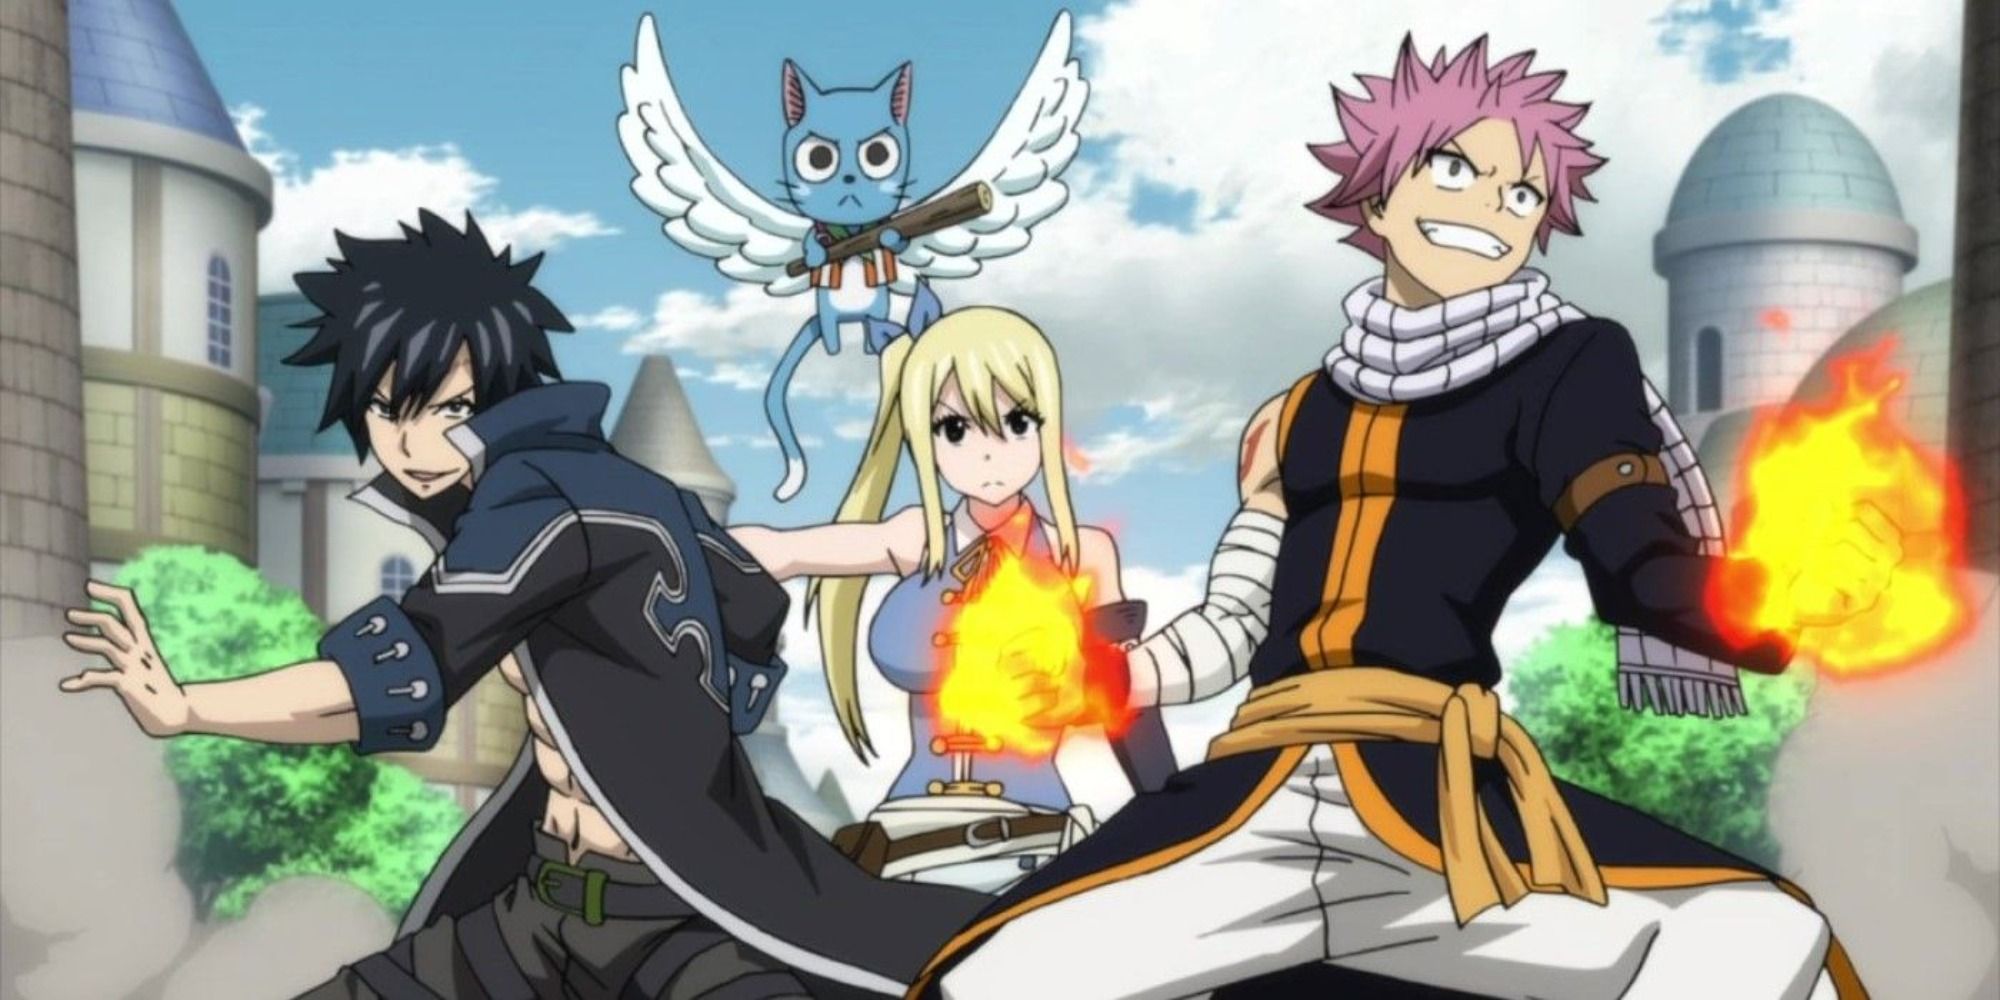 Scene from the anime Fairy Tail